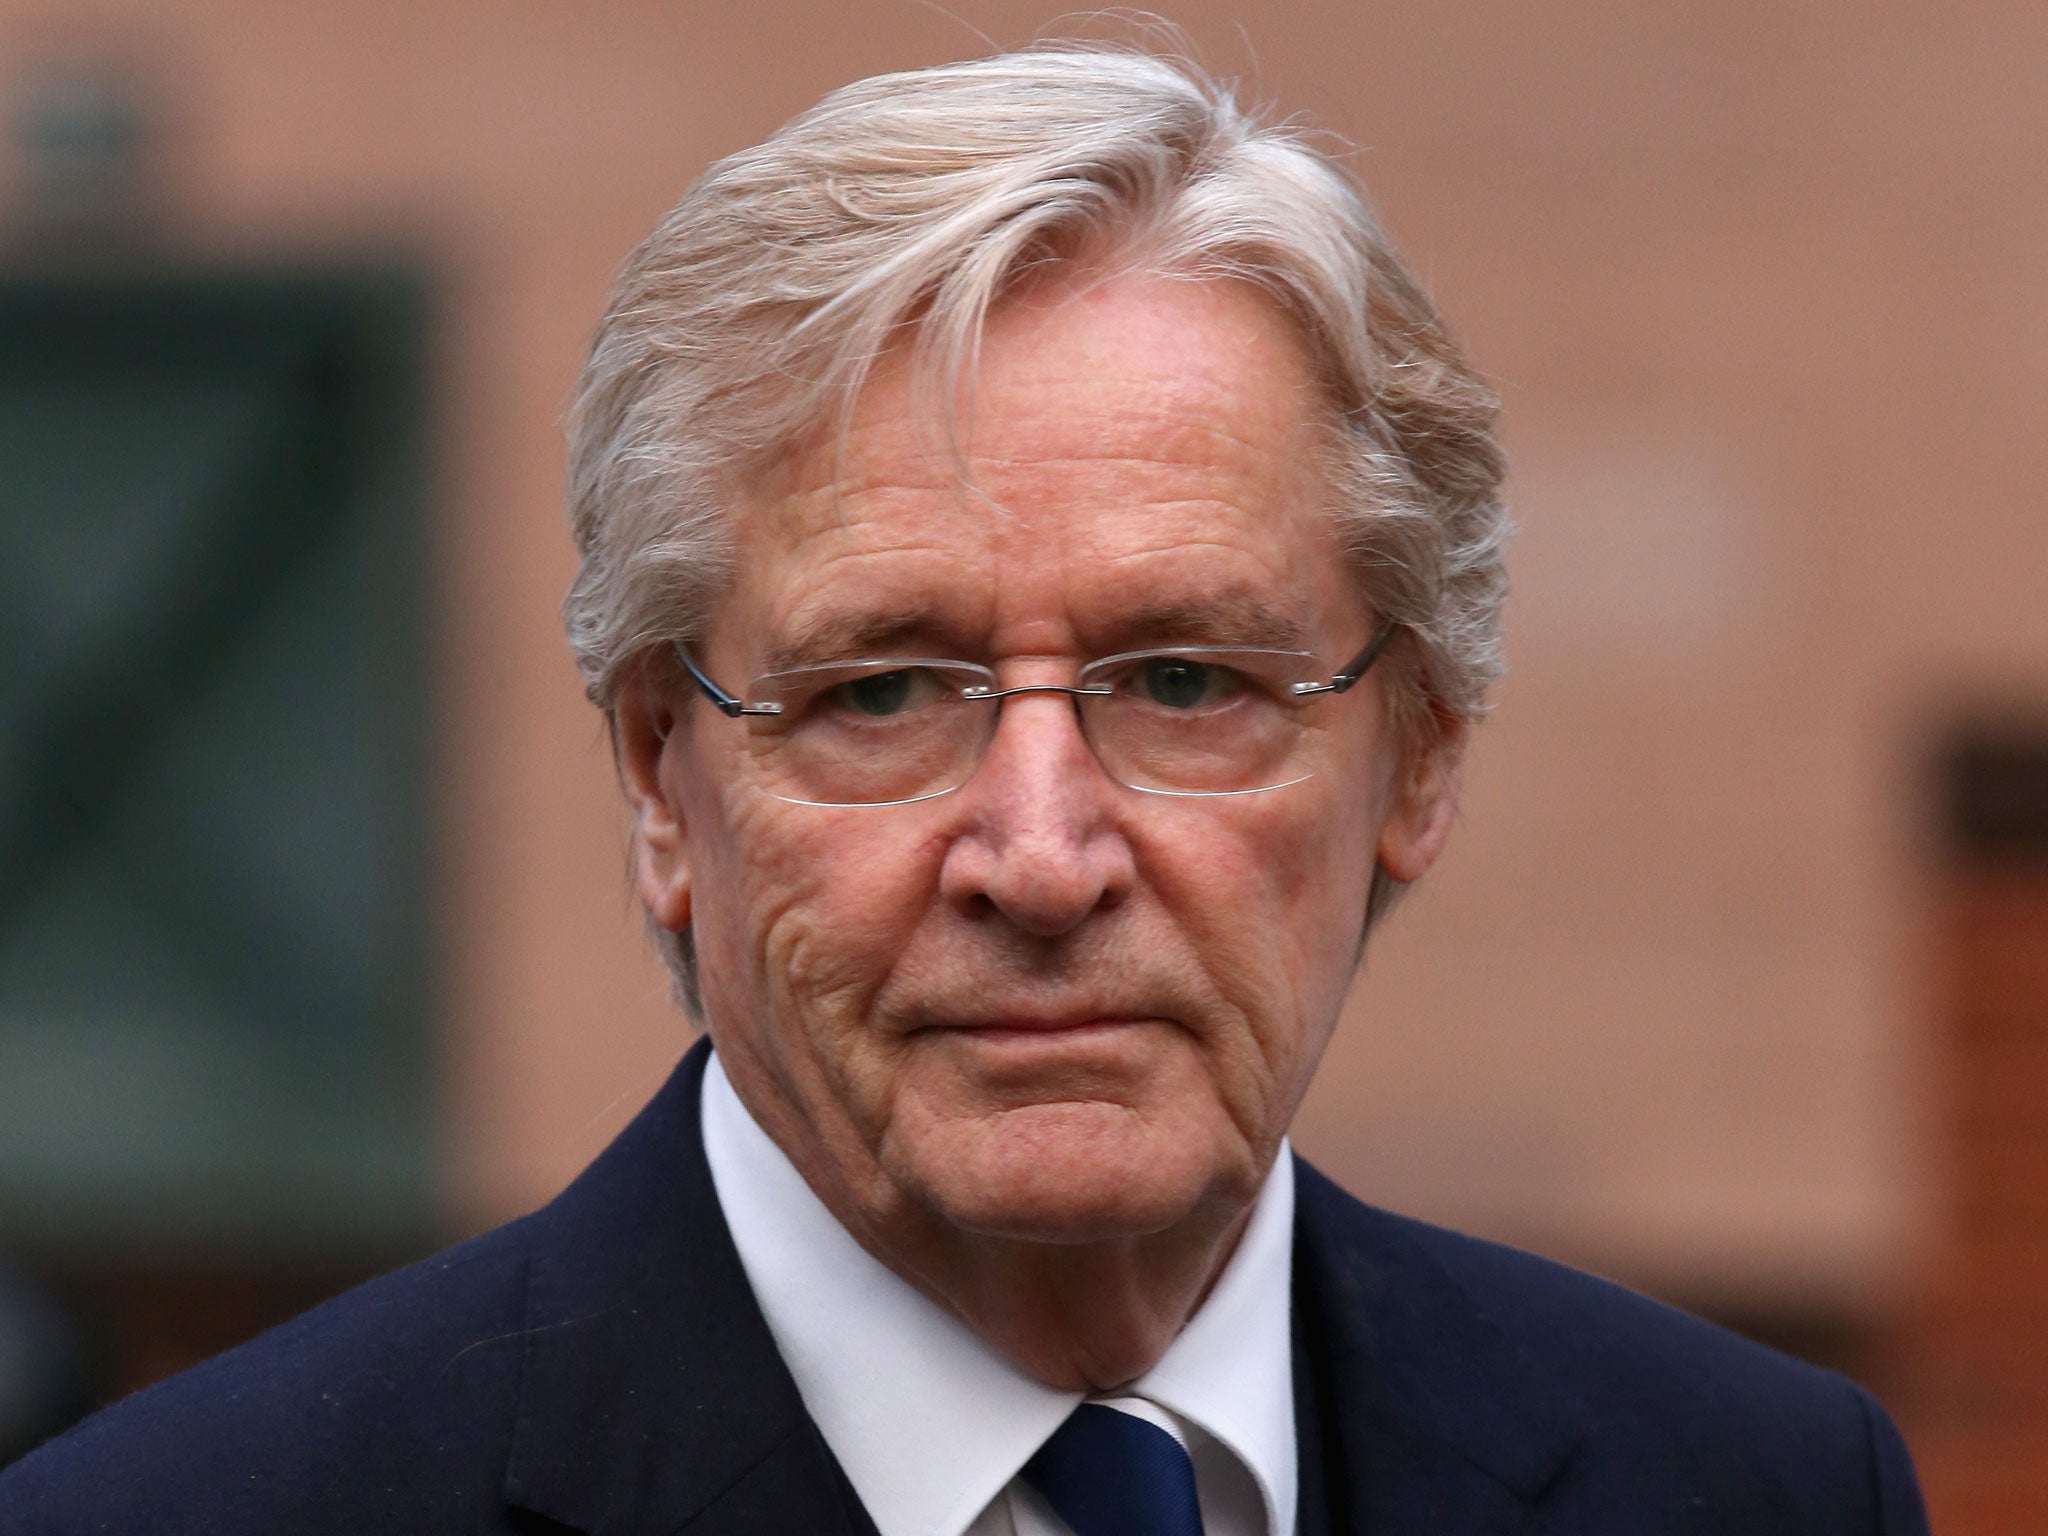 Coronation Street actor William Roache arrives at Preston Crown Court for his trial of historical sexual offence allegations.